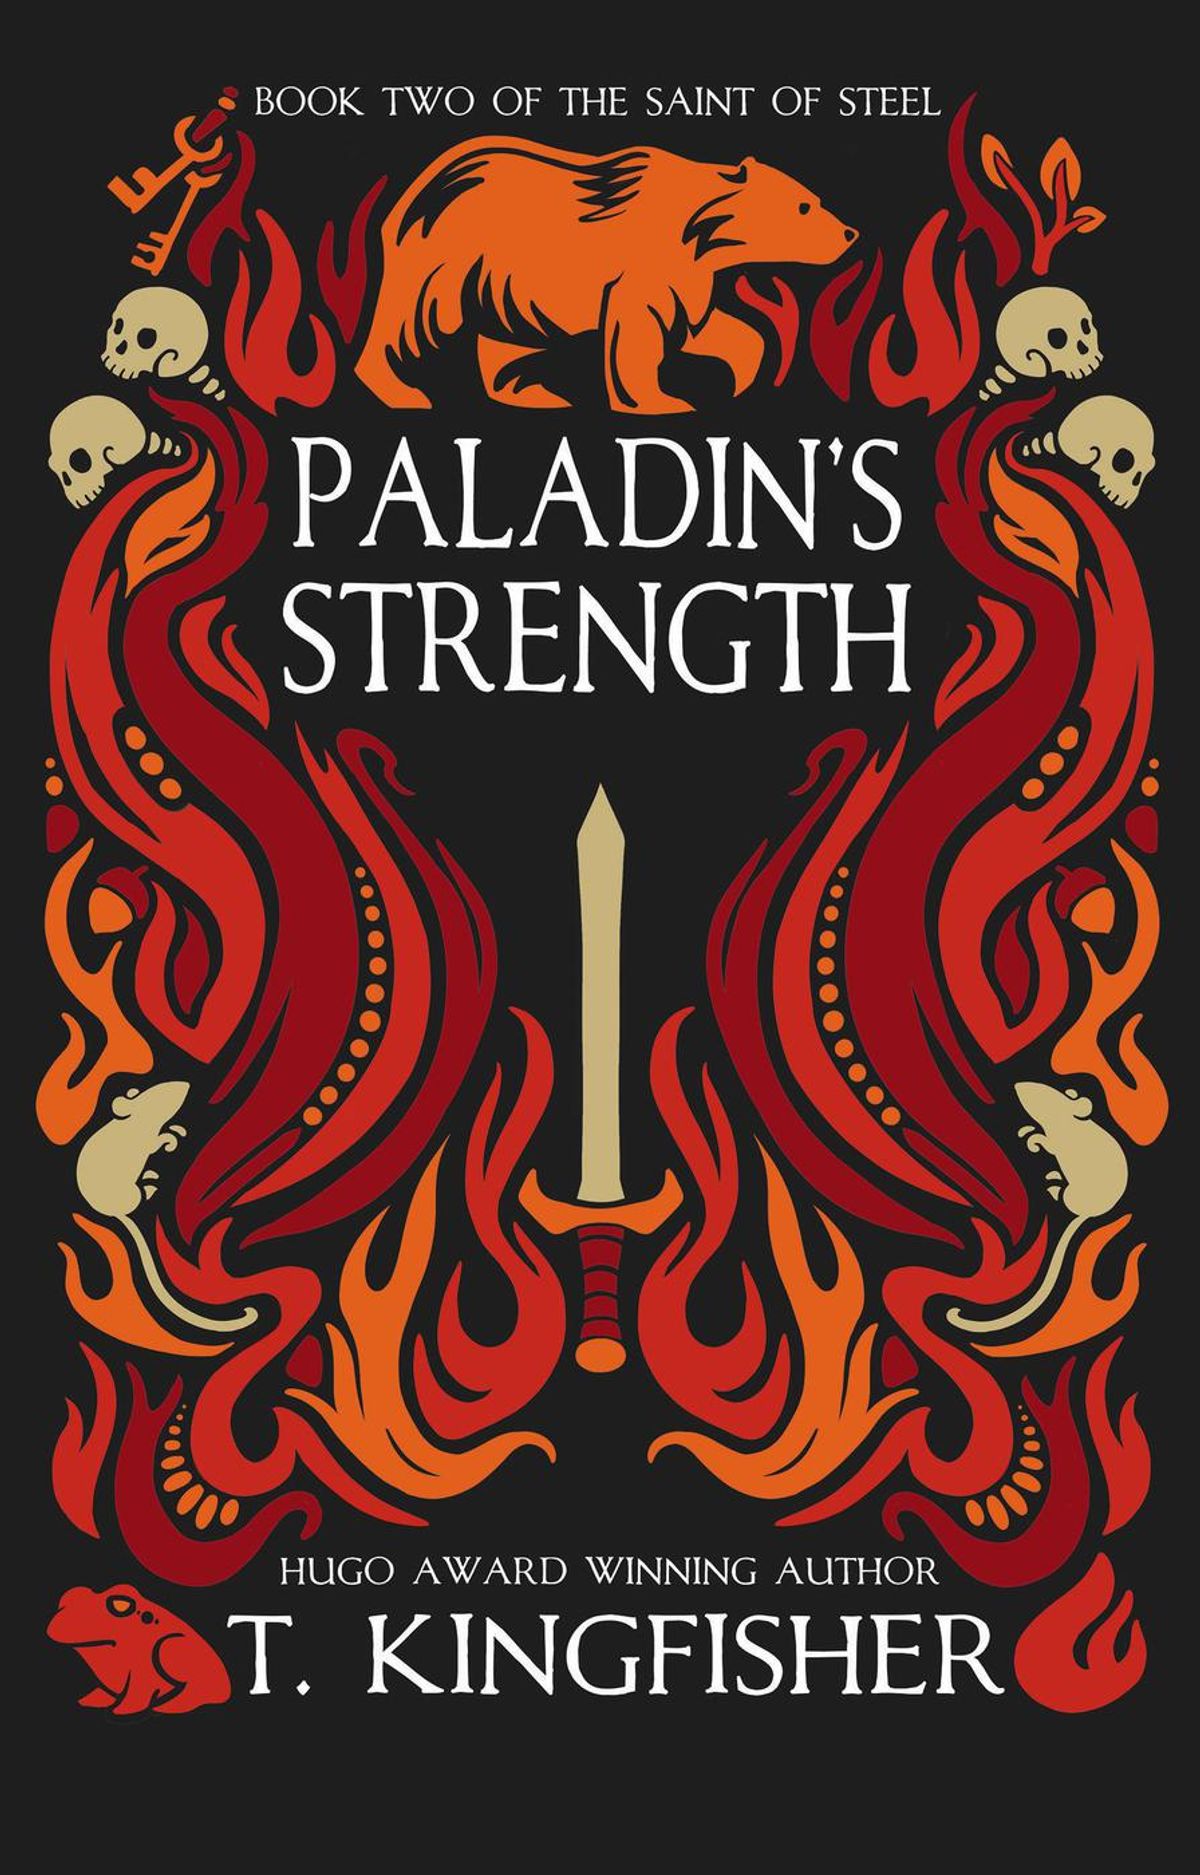 The cover for “Paladin’s Strength” by T. Kingfisher show shoes an illustration of a sword surrounded by flames and a few skulls